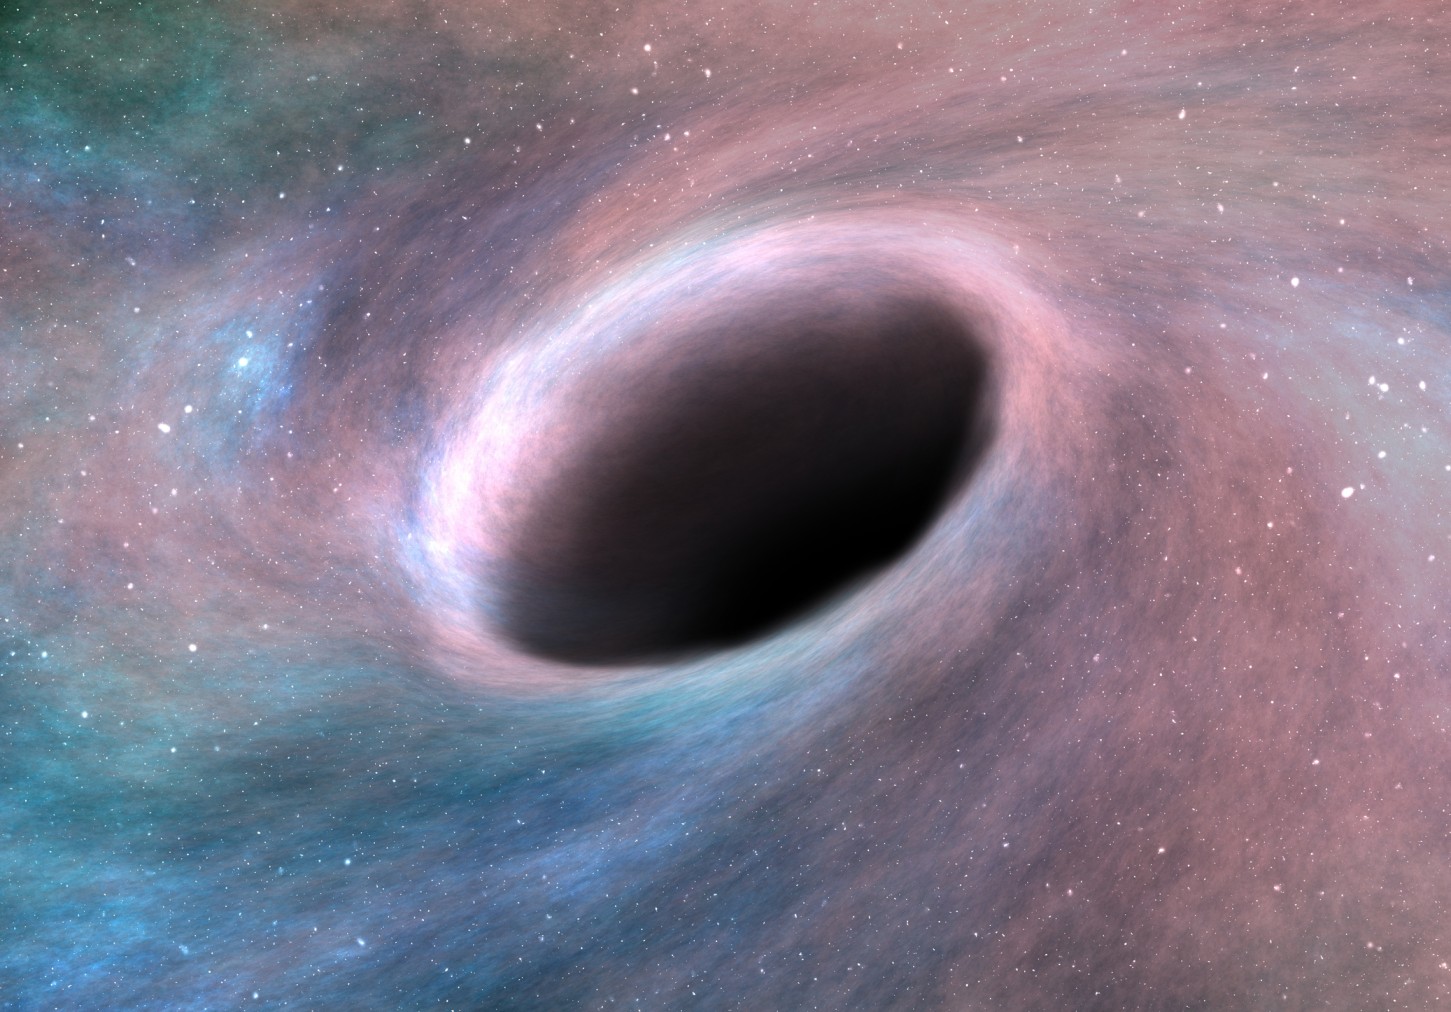 A monster black hole found to be 40bn times the mass Sun, or 2/3 the mass of Milky Way all stars